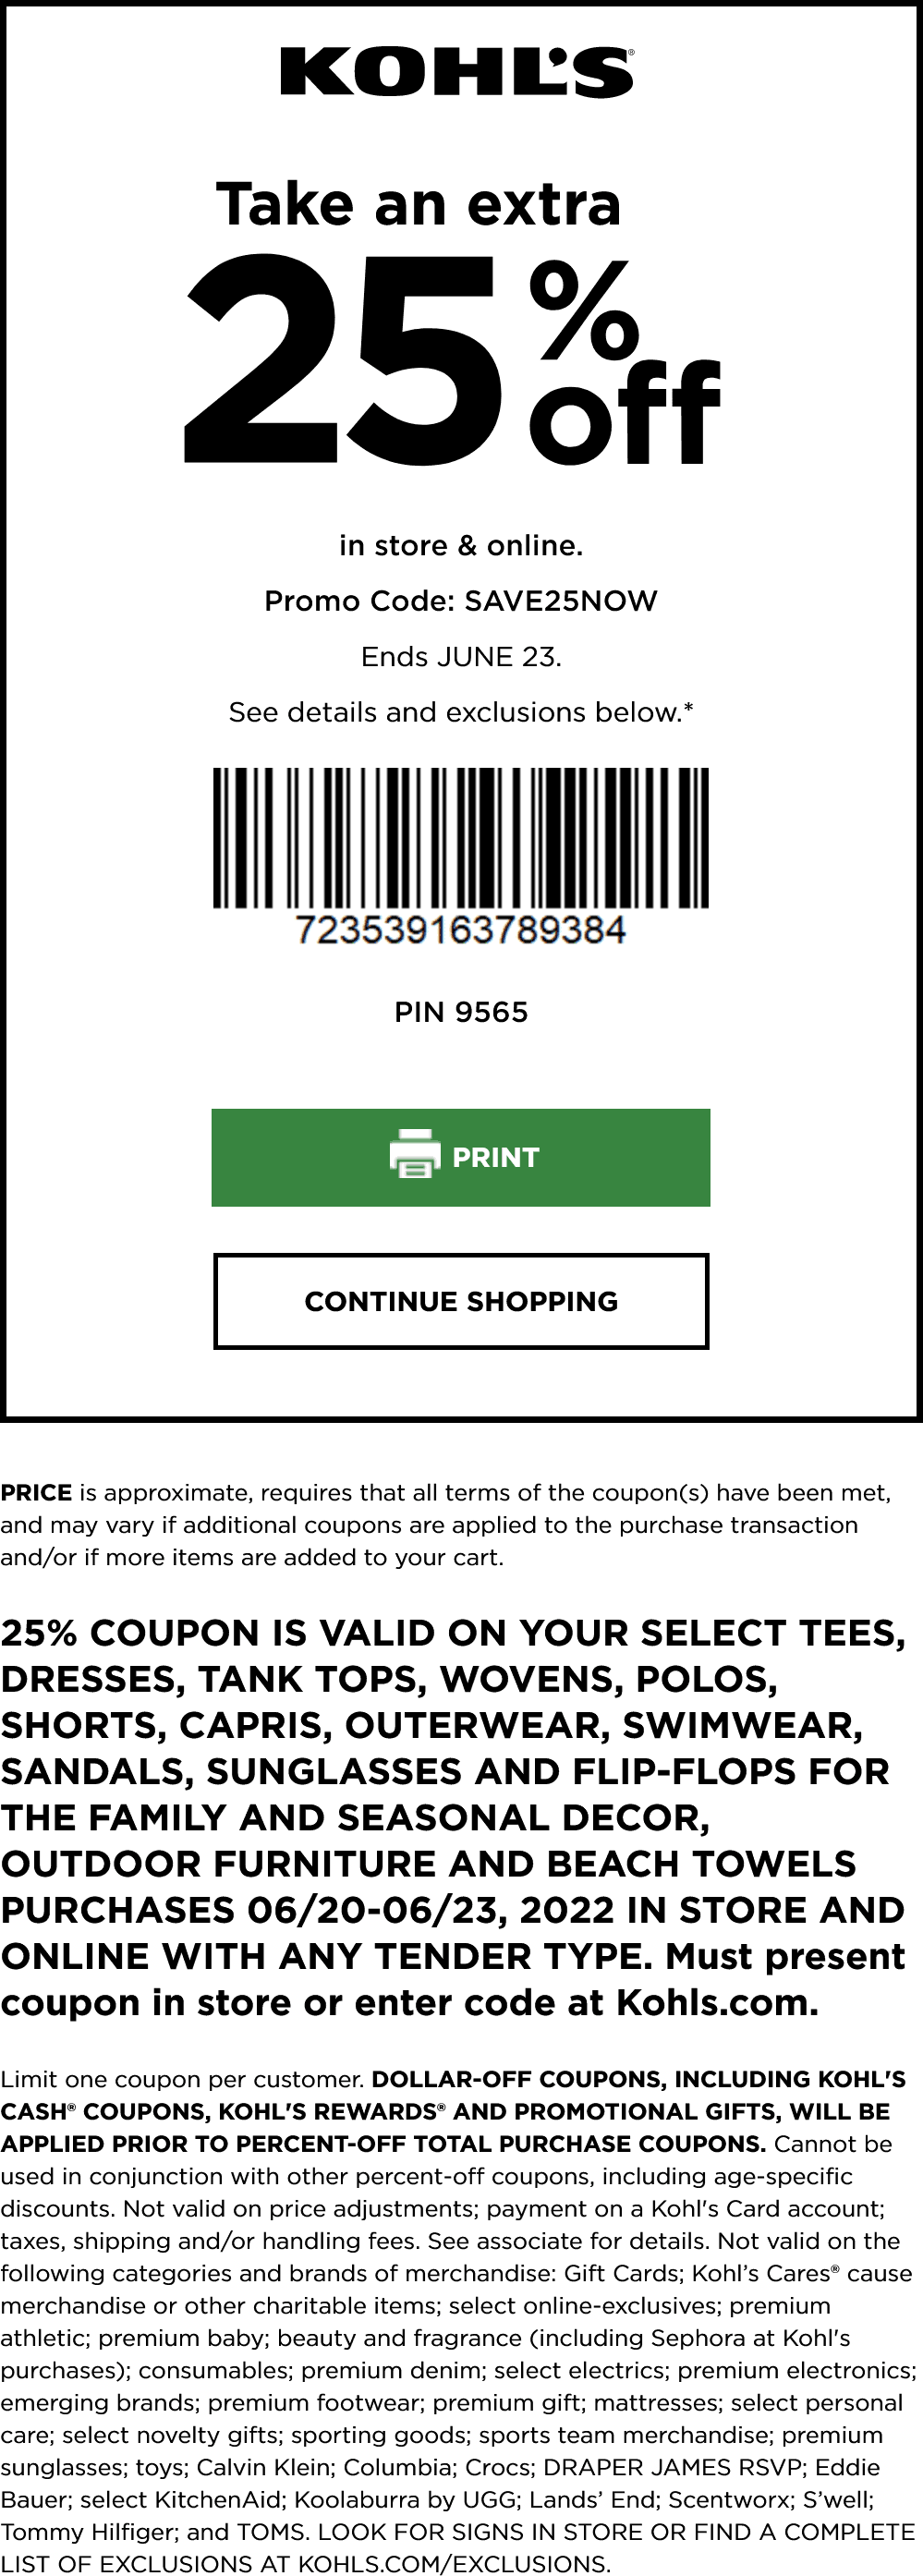 Kohls coupons & promo code for [August 2022]